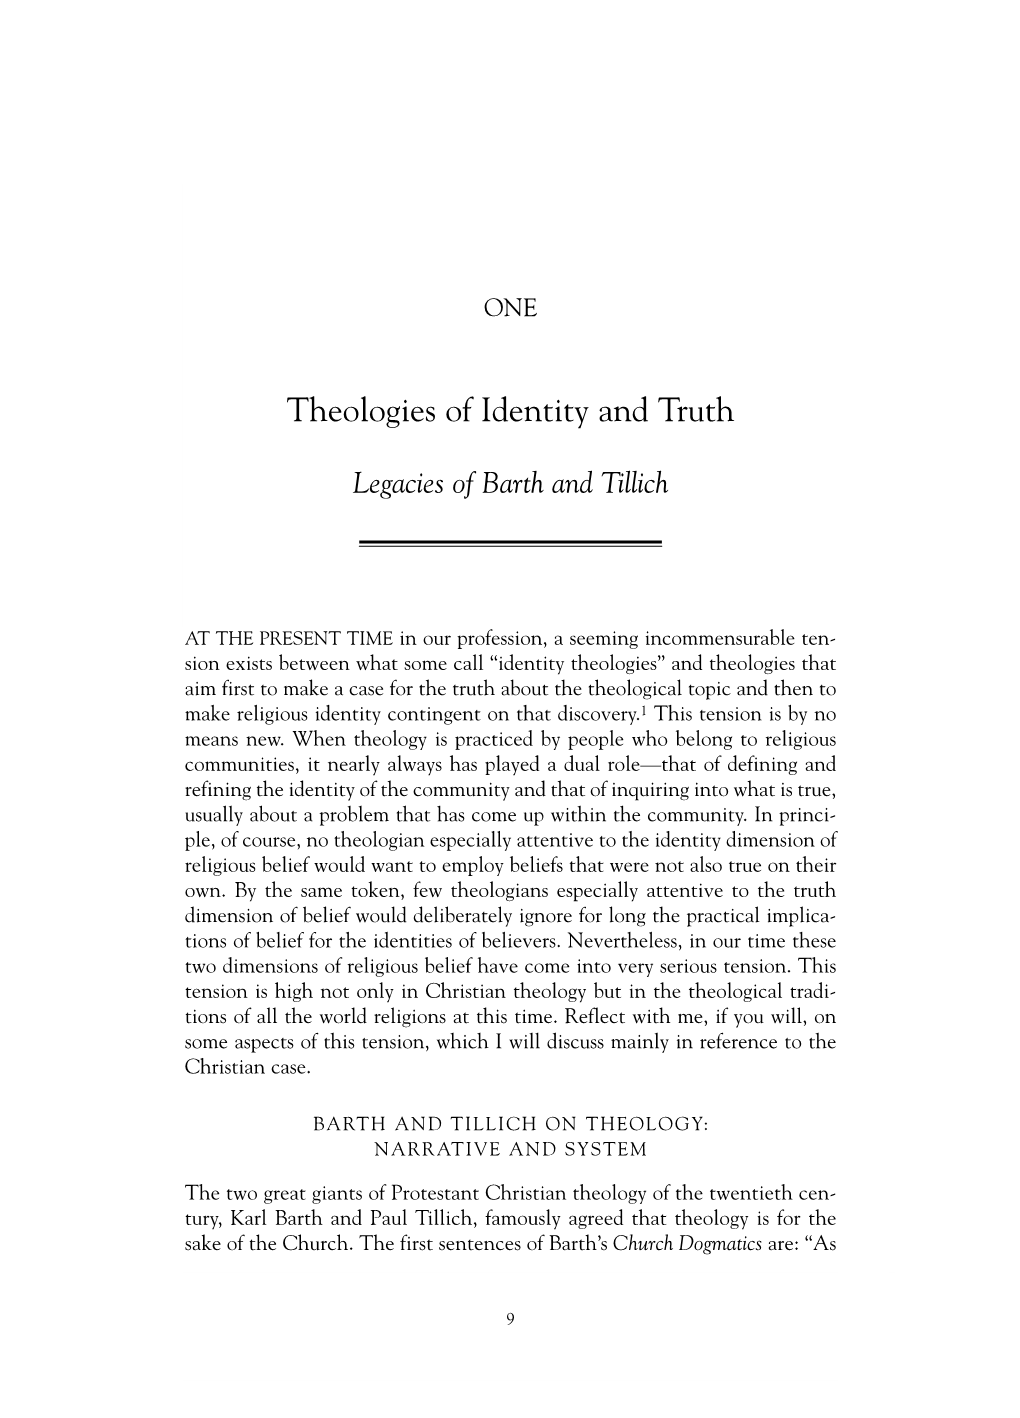 Theologies of Identity and Truth